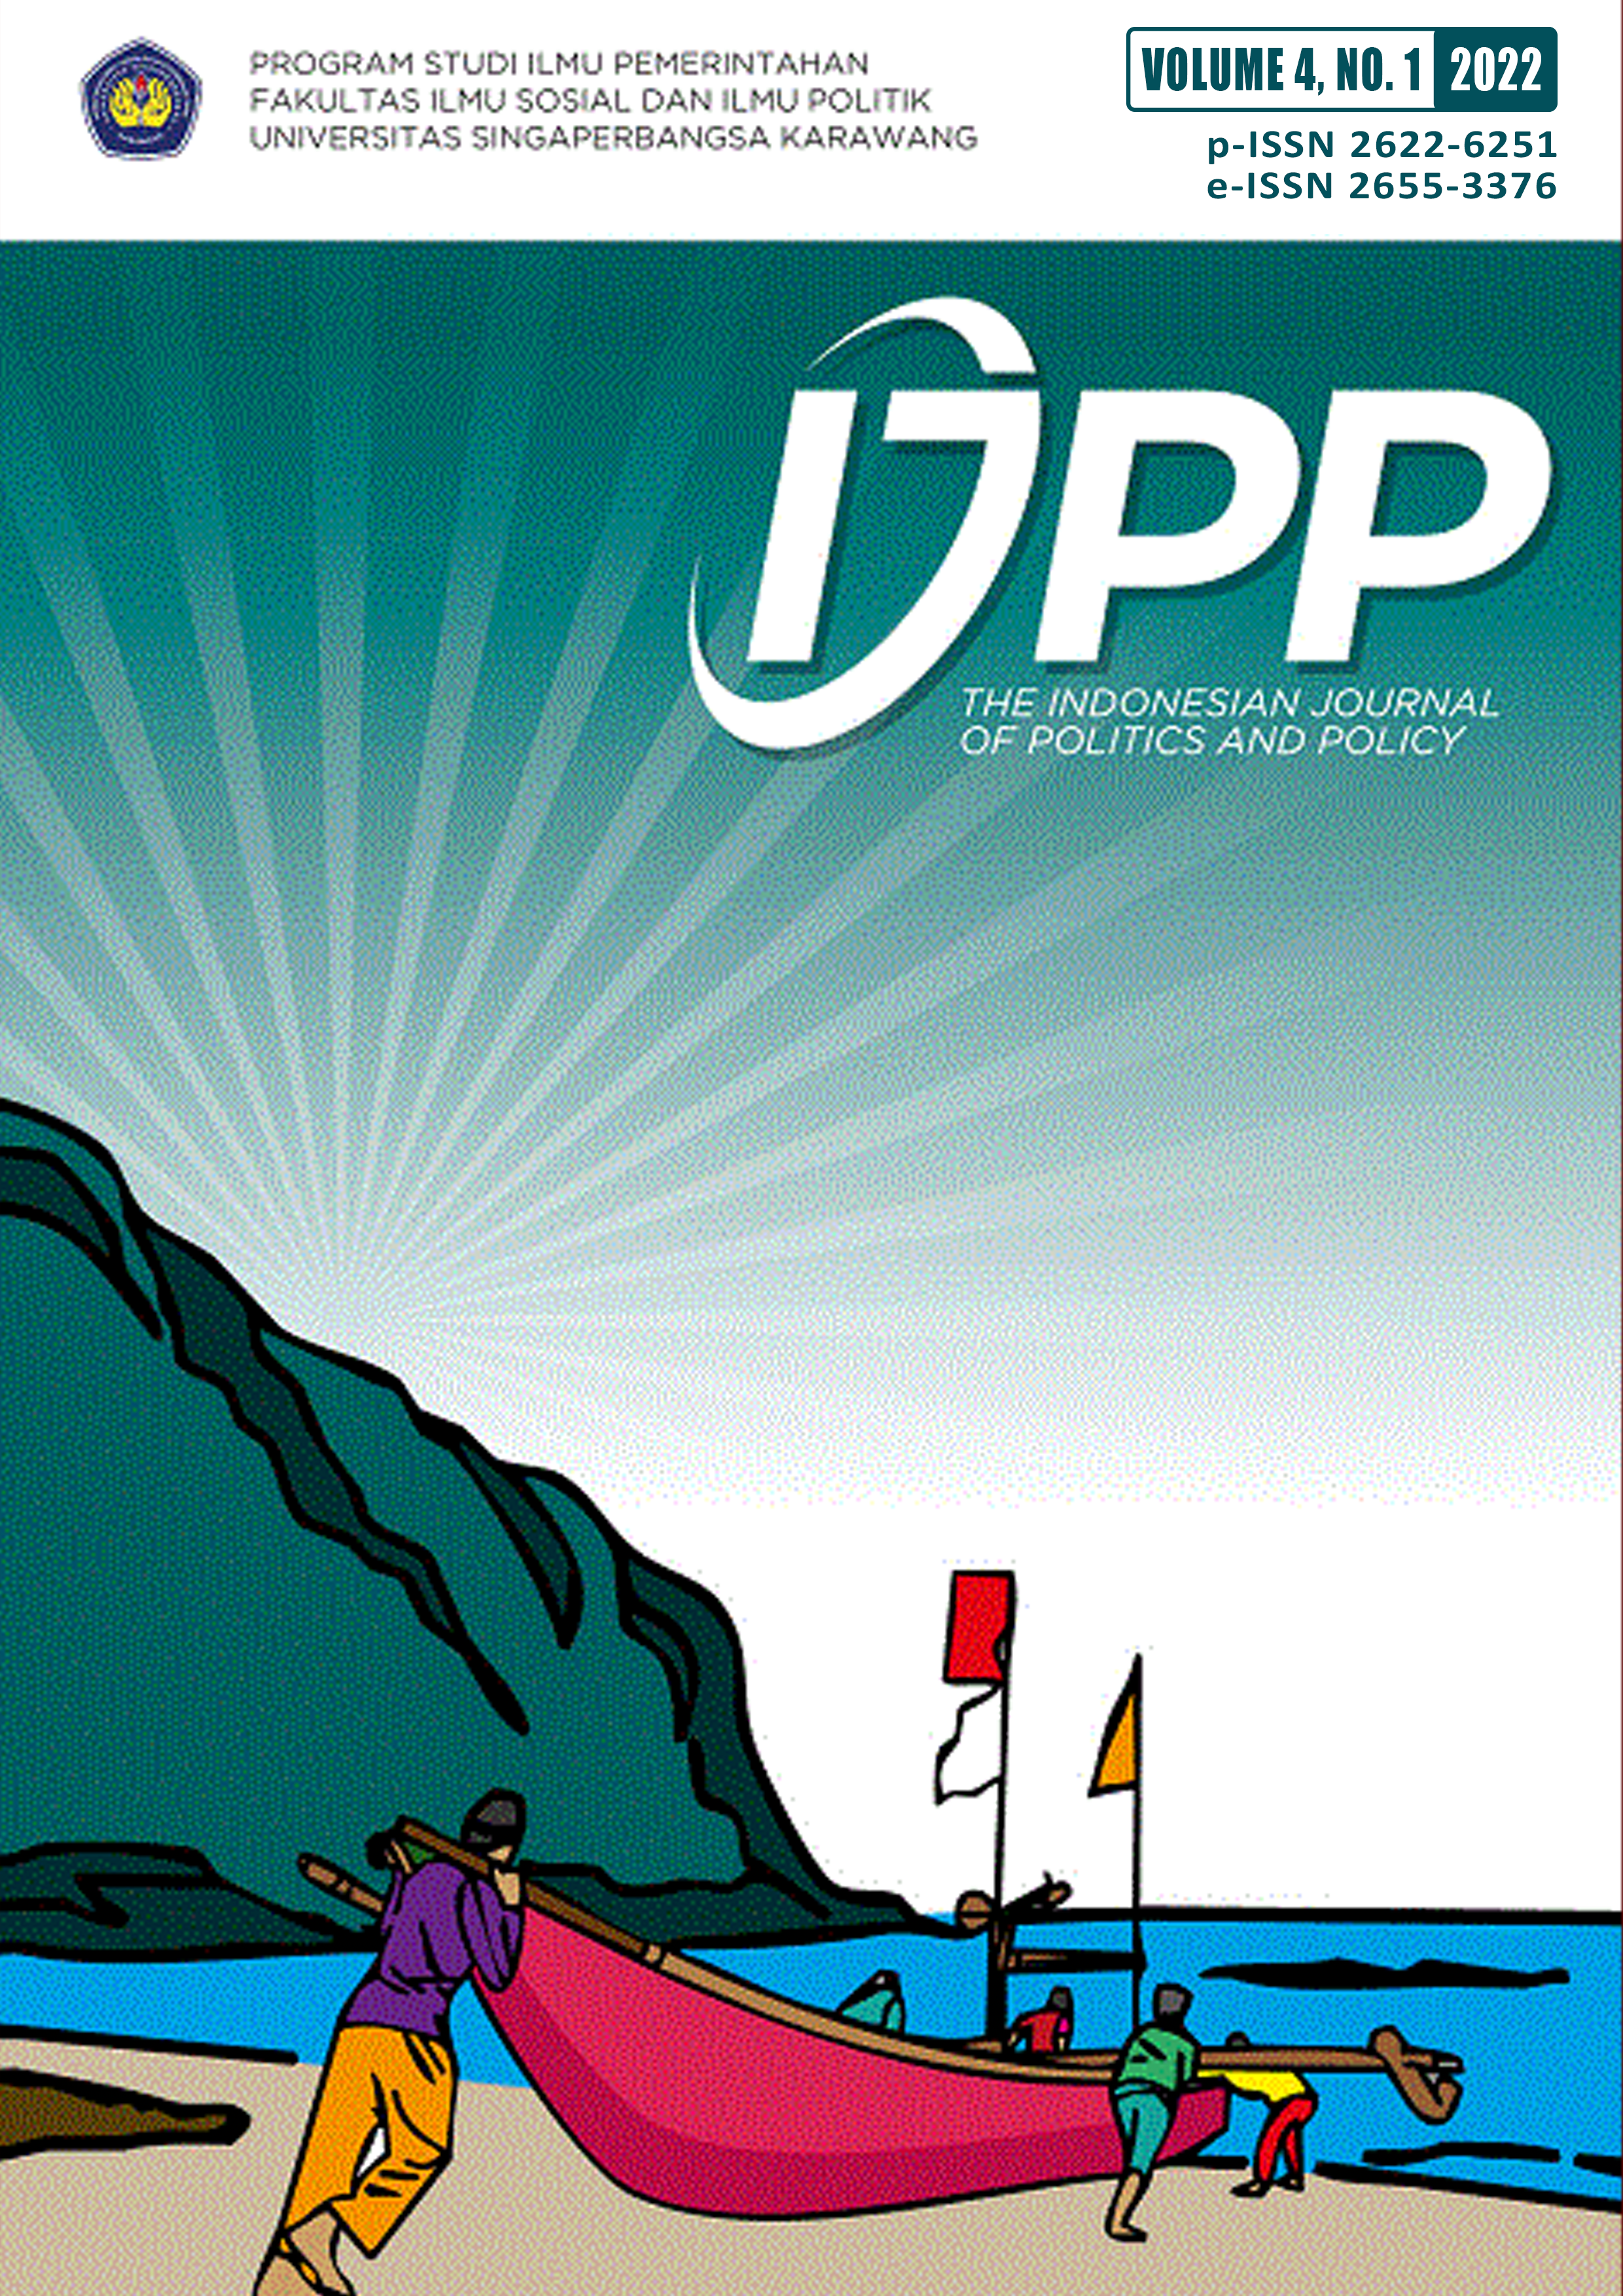 					Lihat Vol 4 No 1 (2022):  THE INDONESIAN JOURNAL OF POLITICS AND POLICY
				